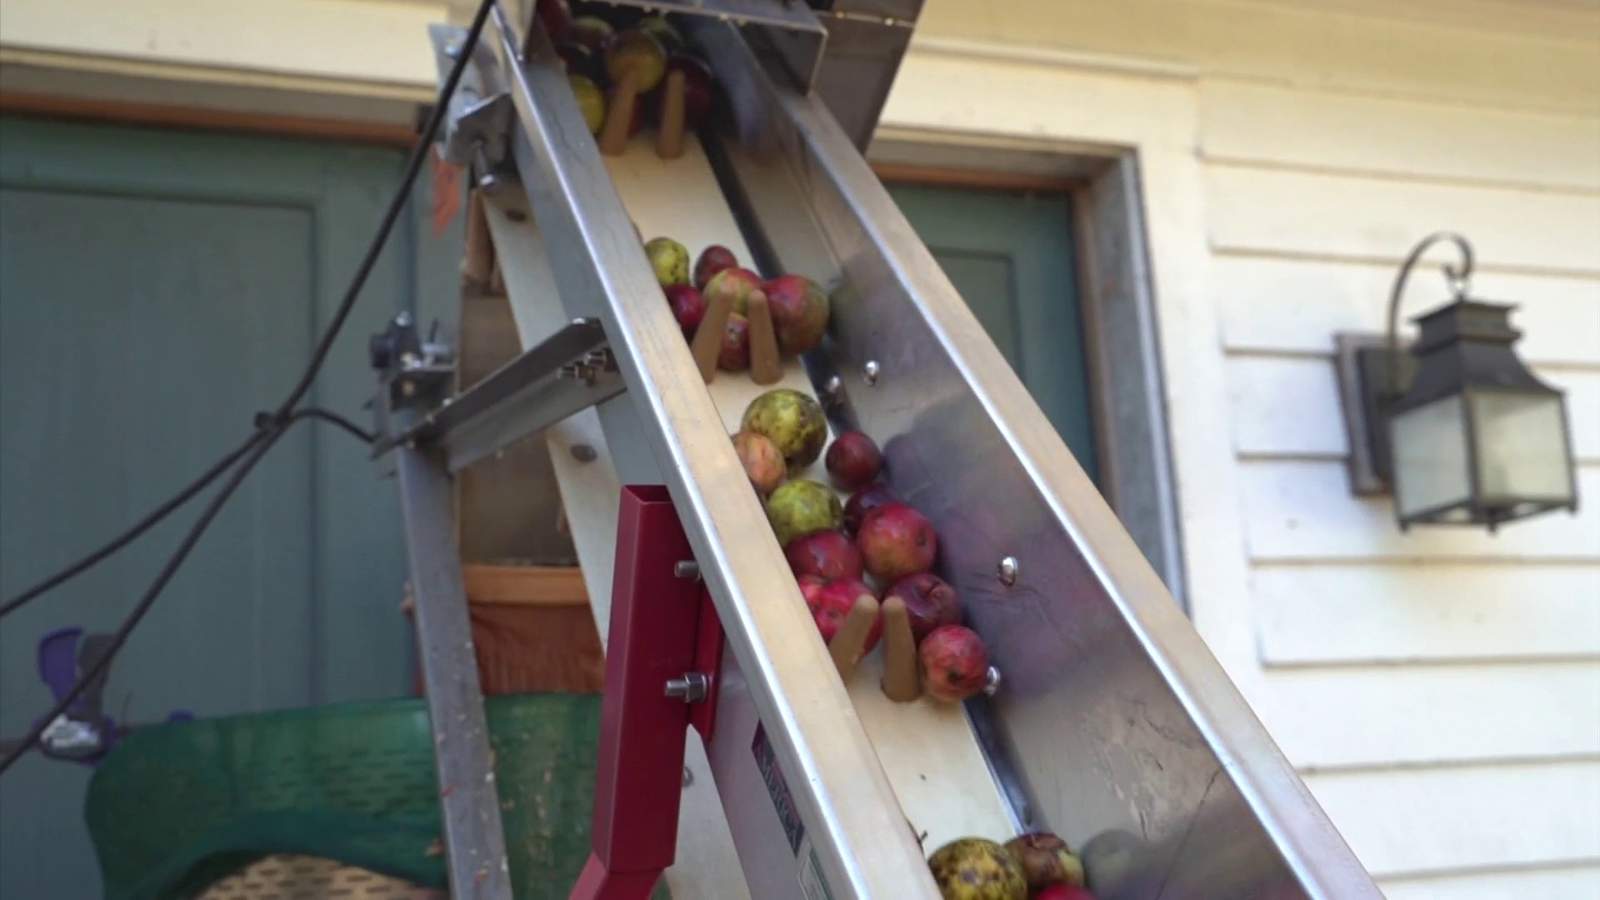 This is how simple and tedious it is to make one-of-a-kind apple cider